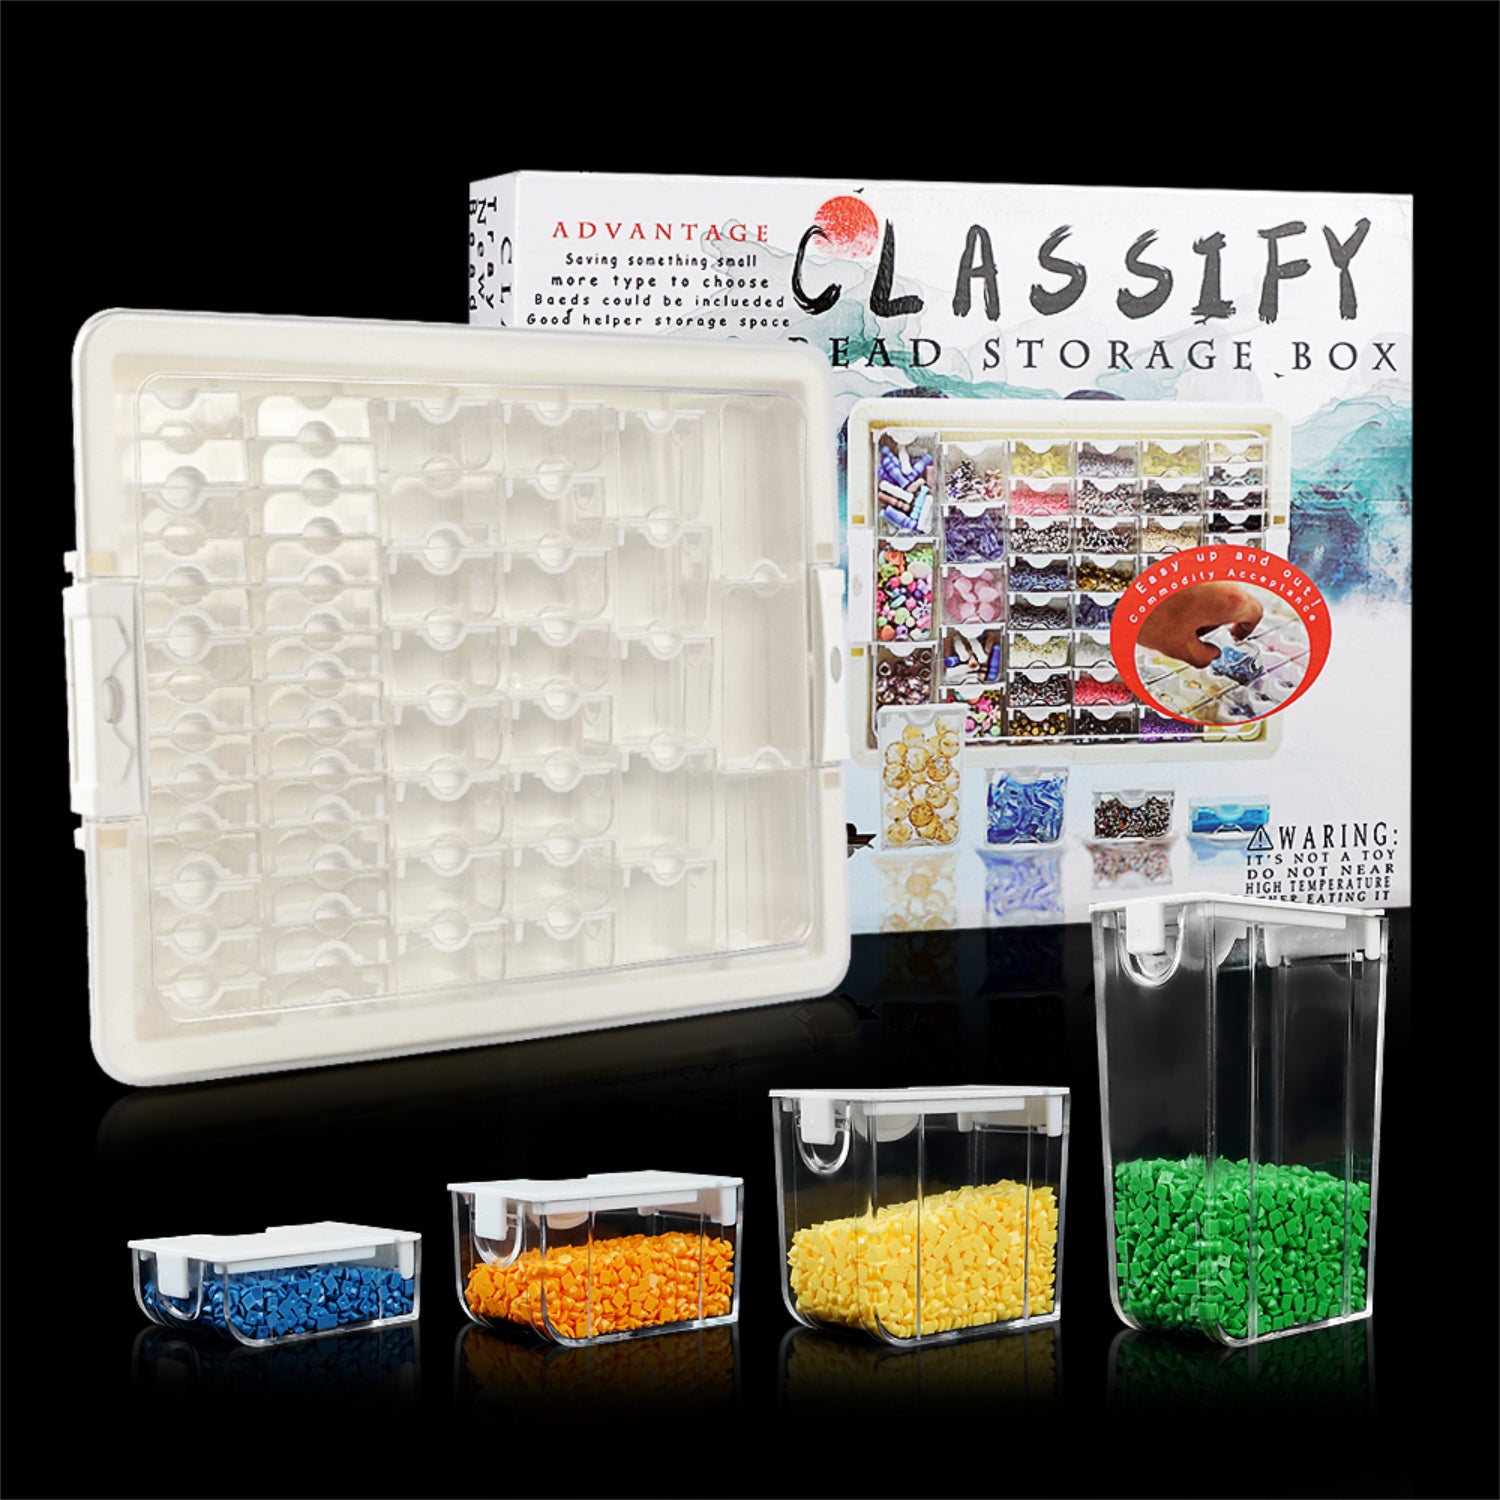 Bead Organizers - Get 15% OFF your first order — HobbyJobby